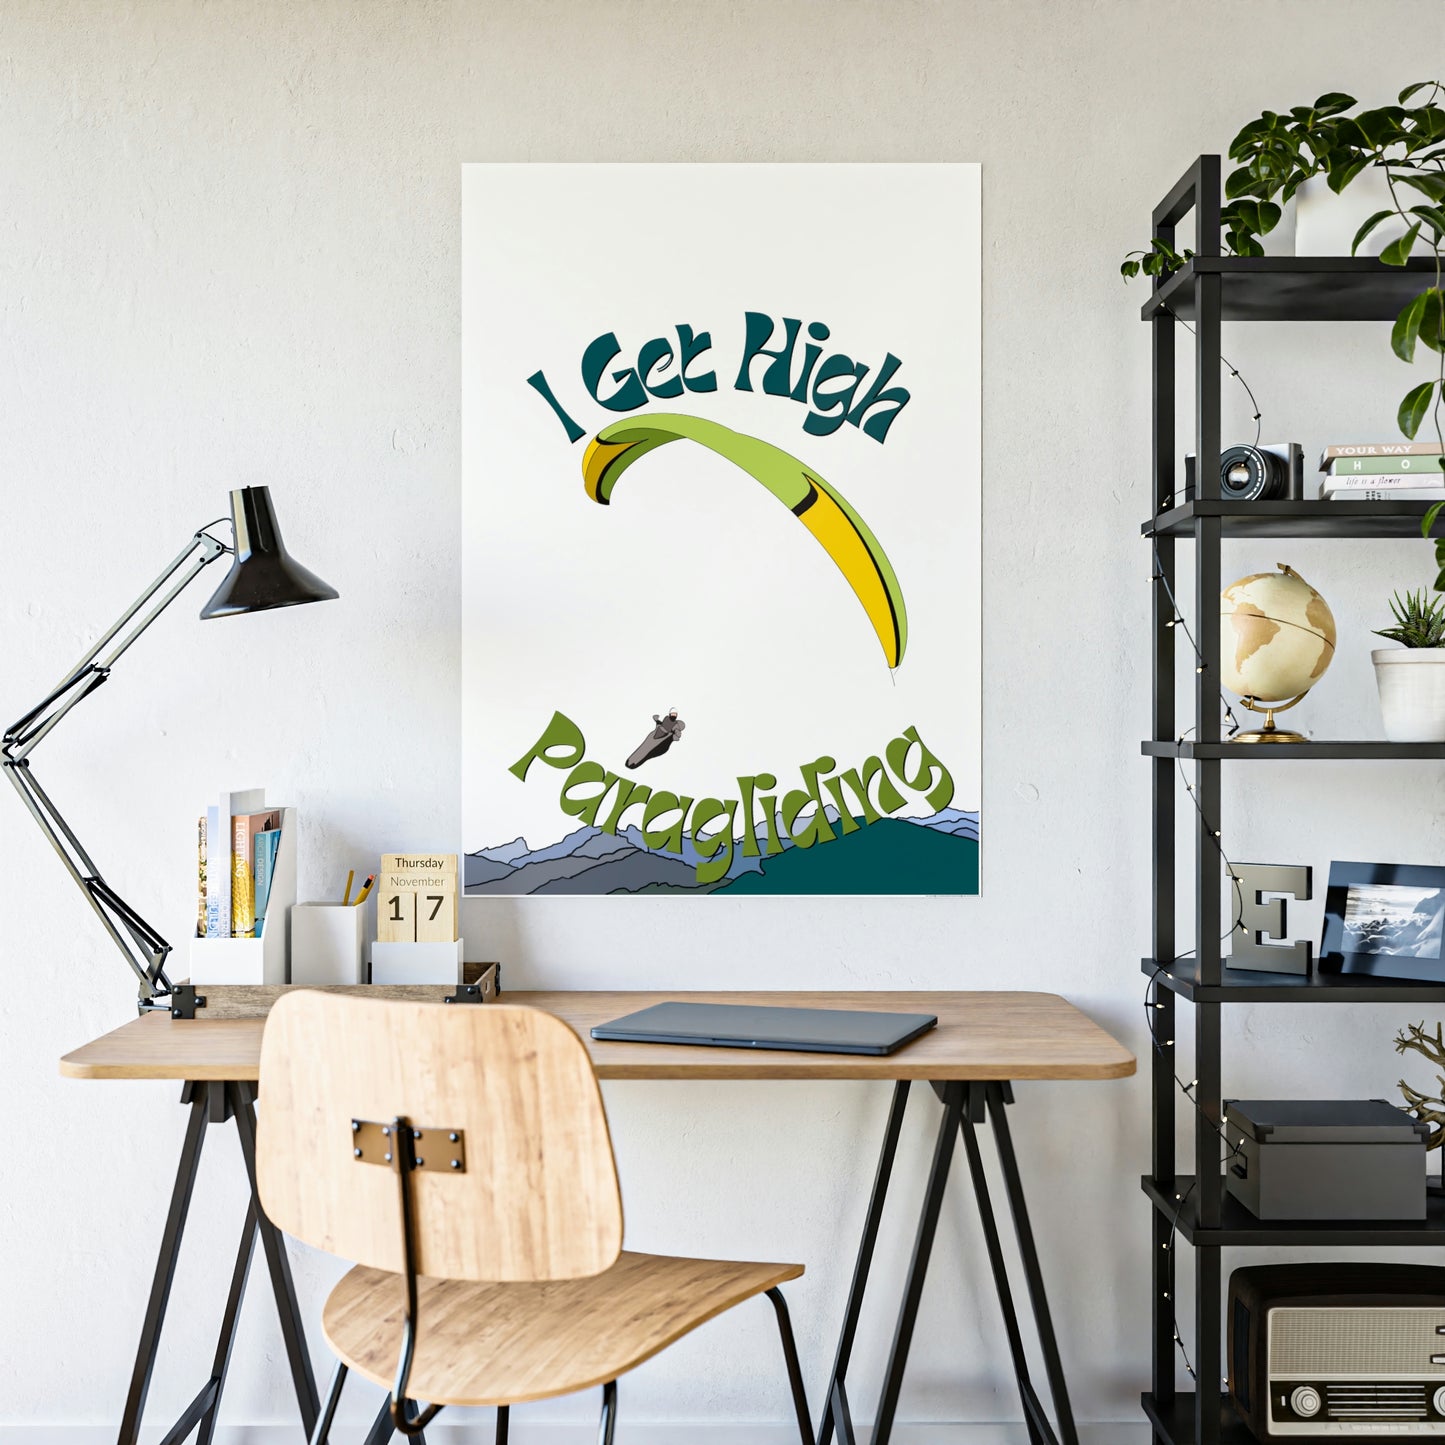 Get High Paragliding - Gloss Posters